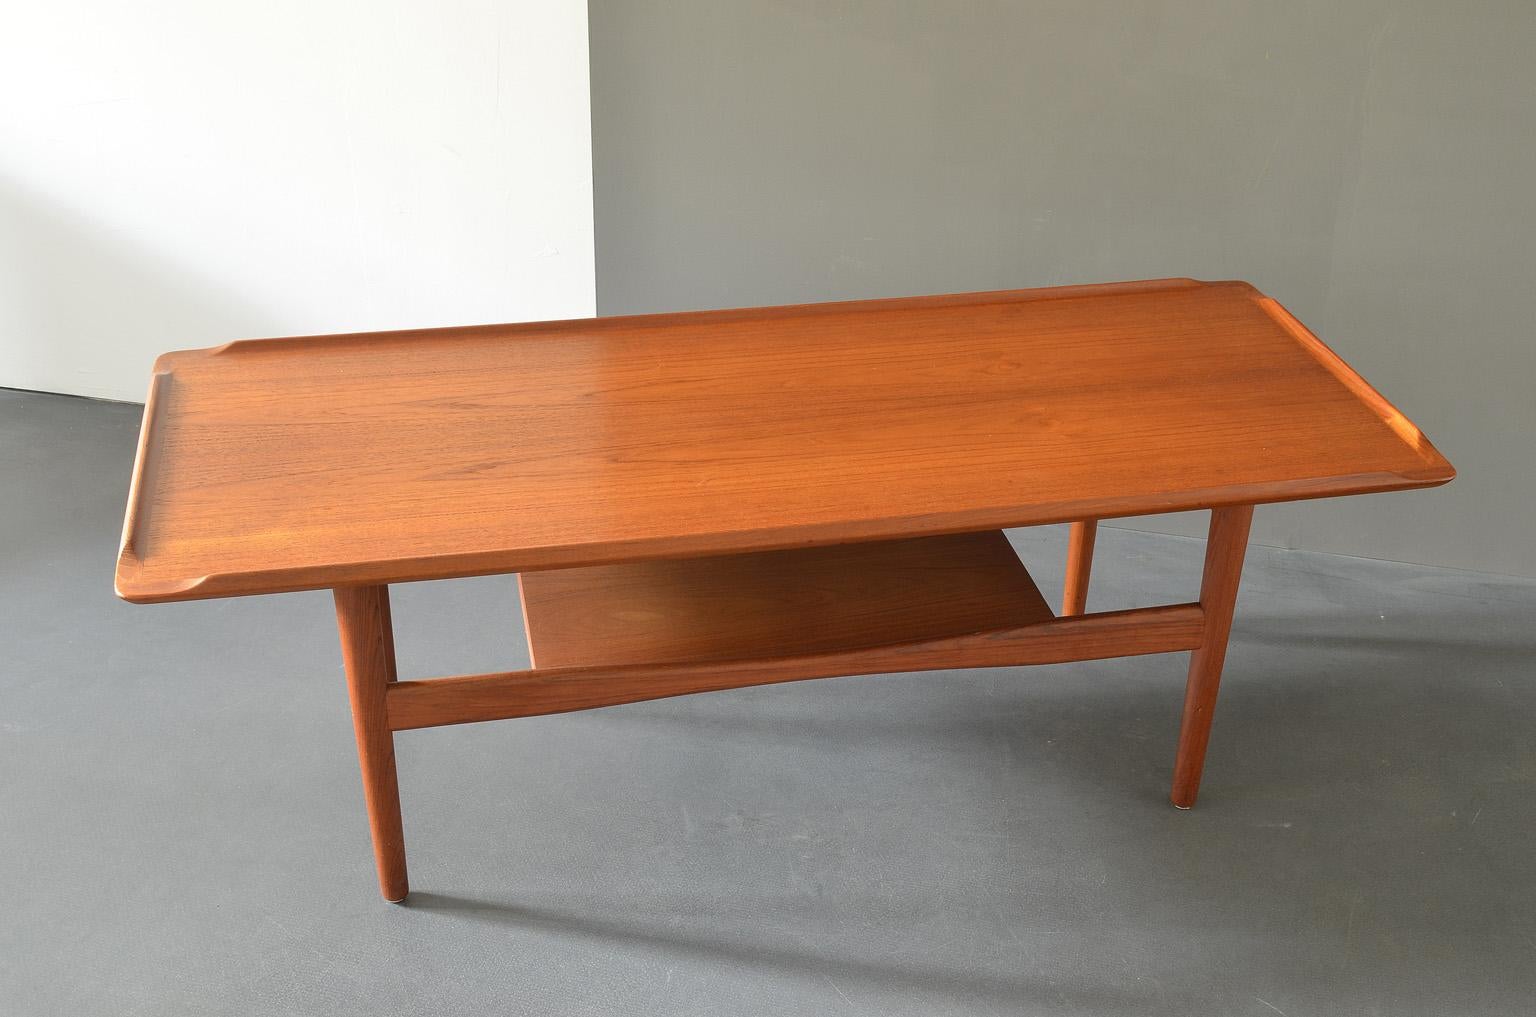 This teak coffee table was produced by IMHA in the 1960s, Germany.